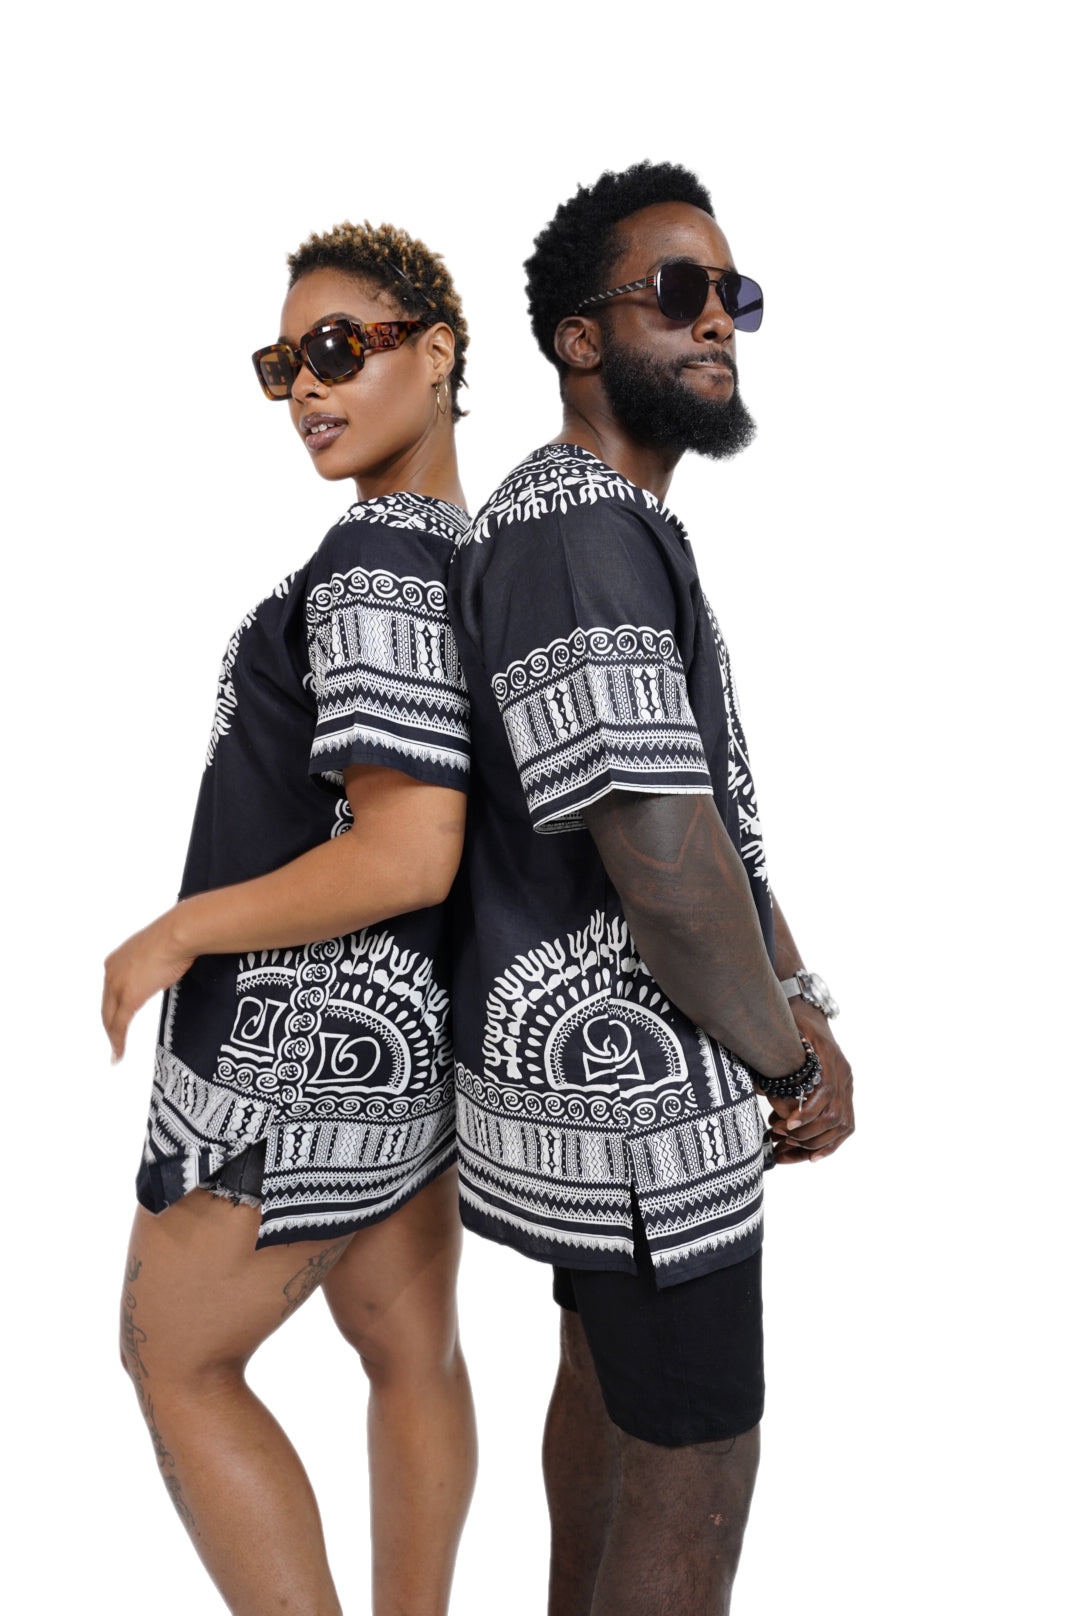 Dupsie's African Print Unisex Dashiki Shirt Suitable for Festivals, Concerts, Cruises, Outdoor Events  DP3578